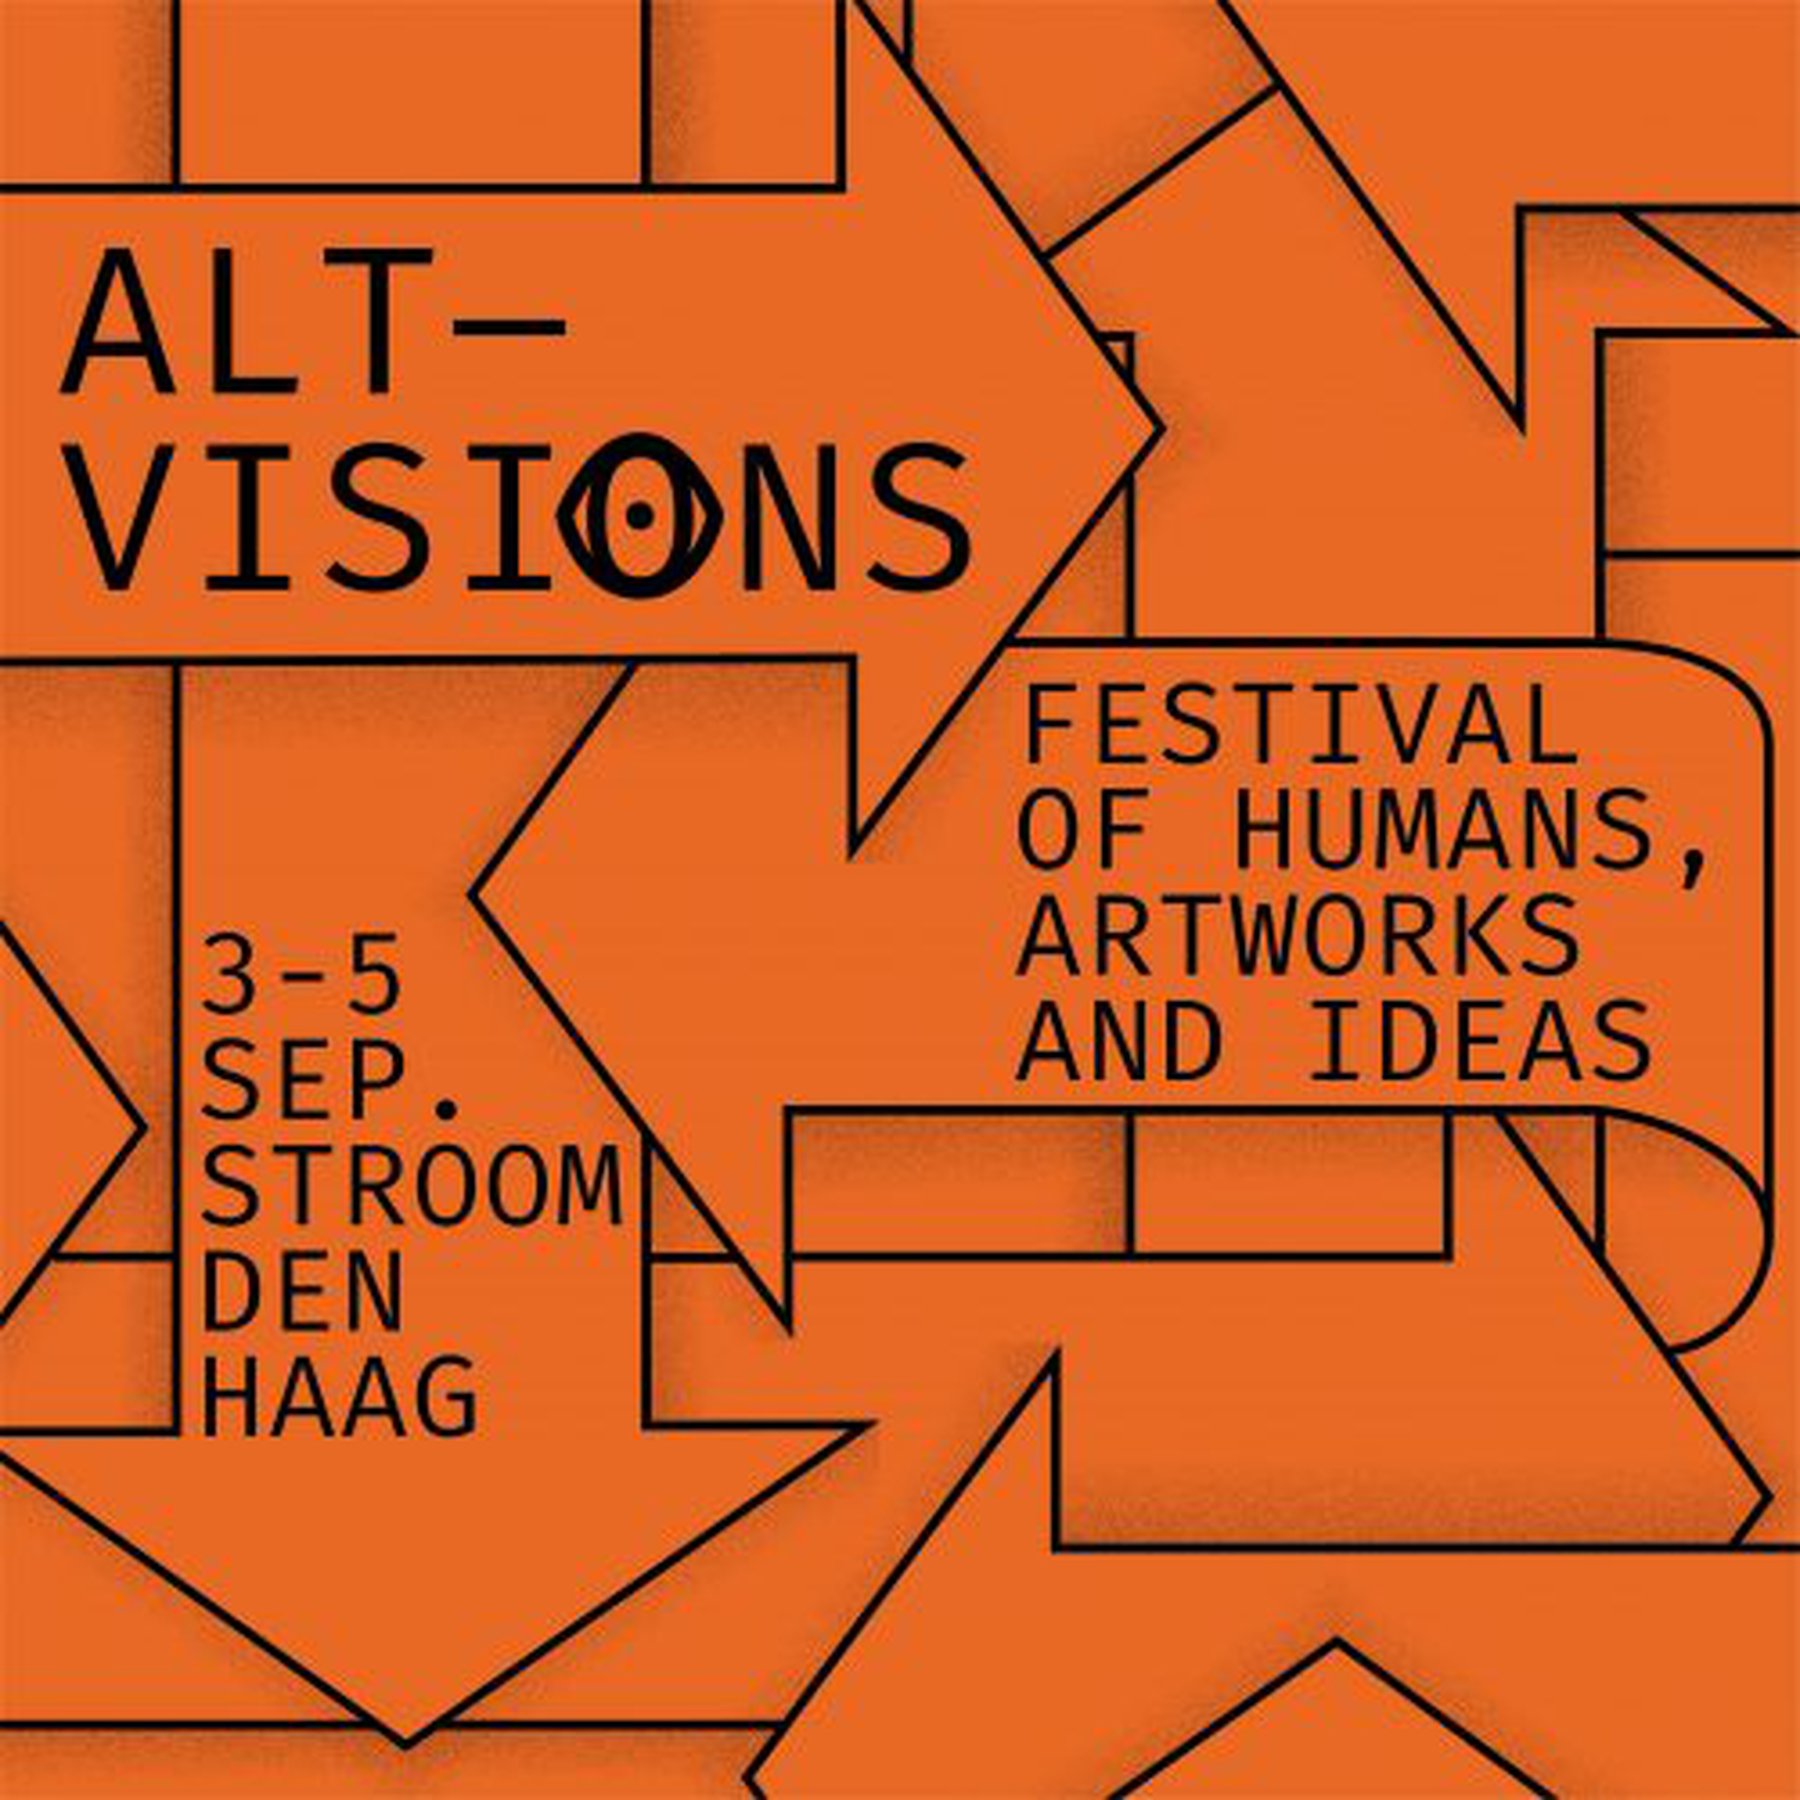 Altvisions